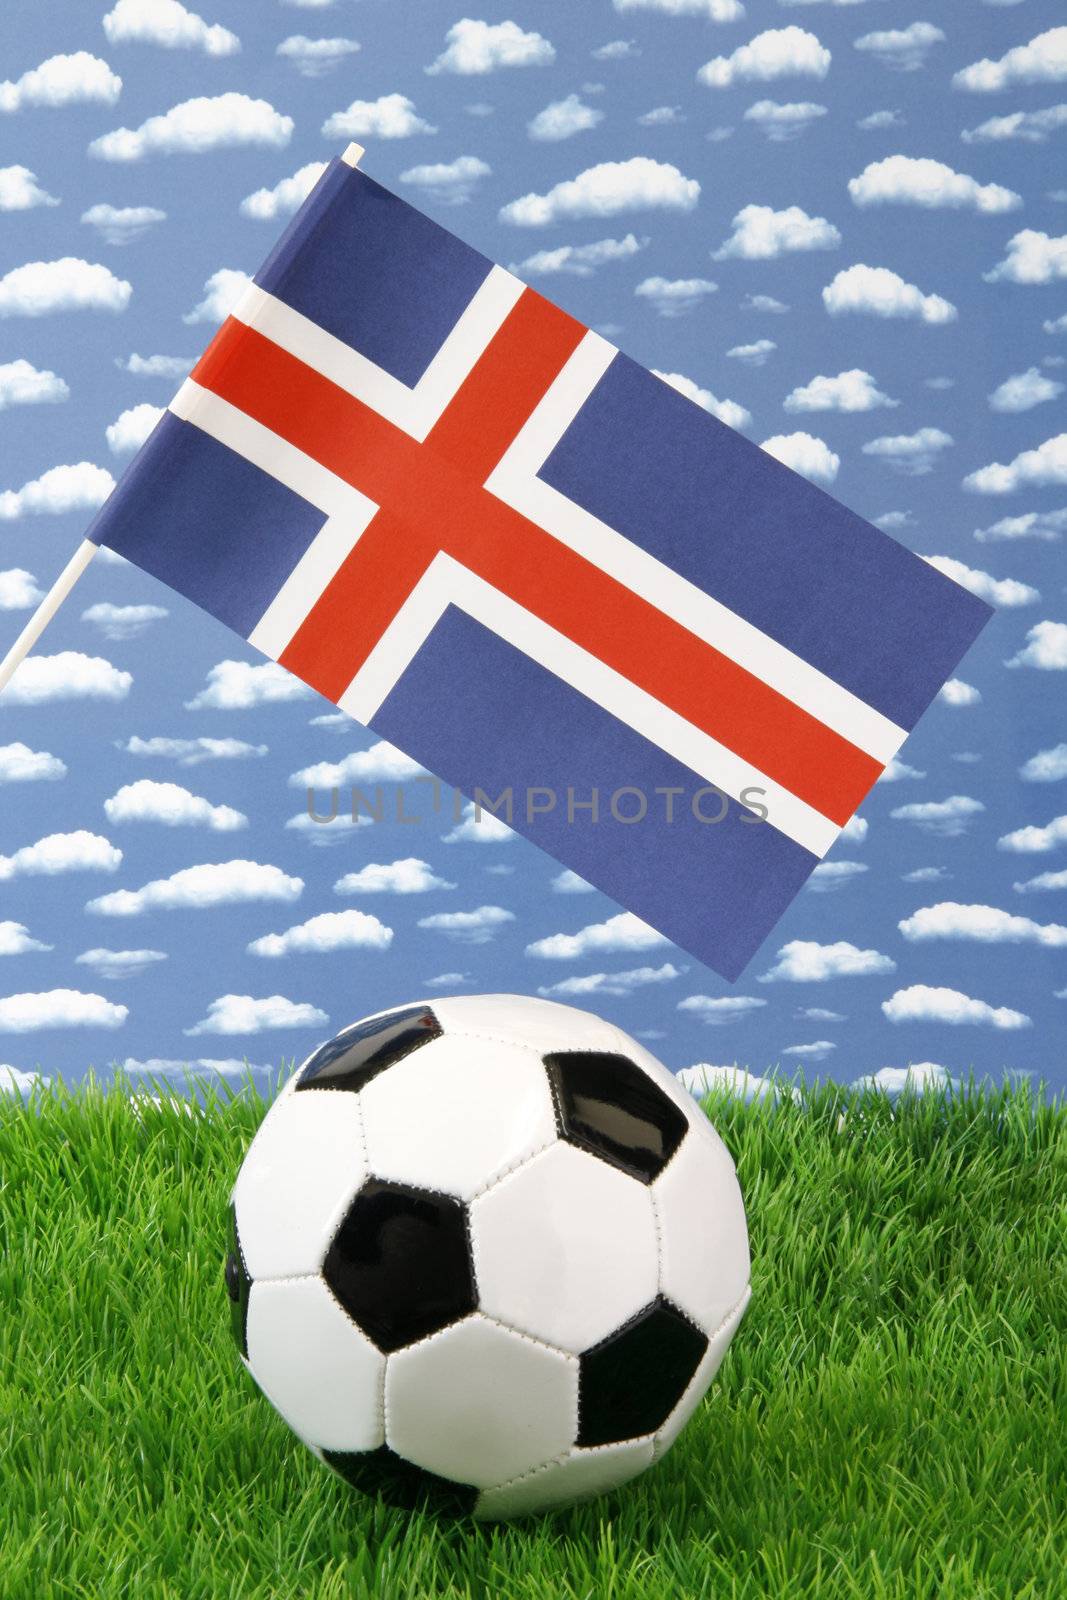 Soccerball on grass with icelandic national flag over sky background